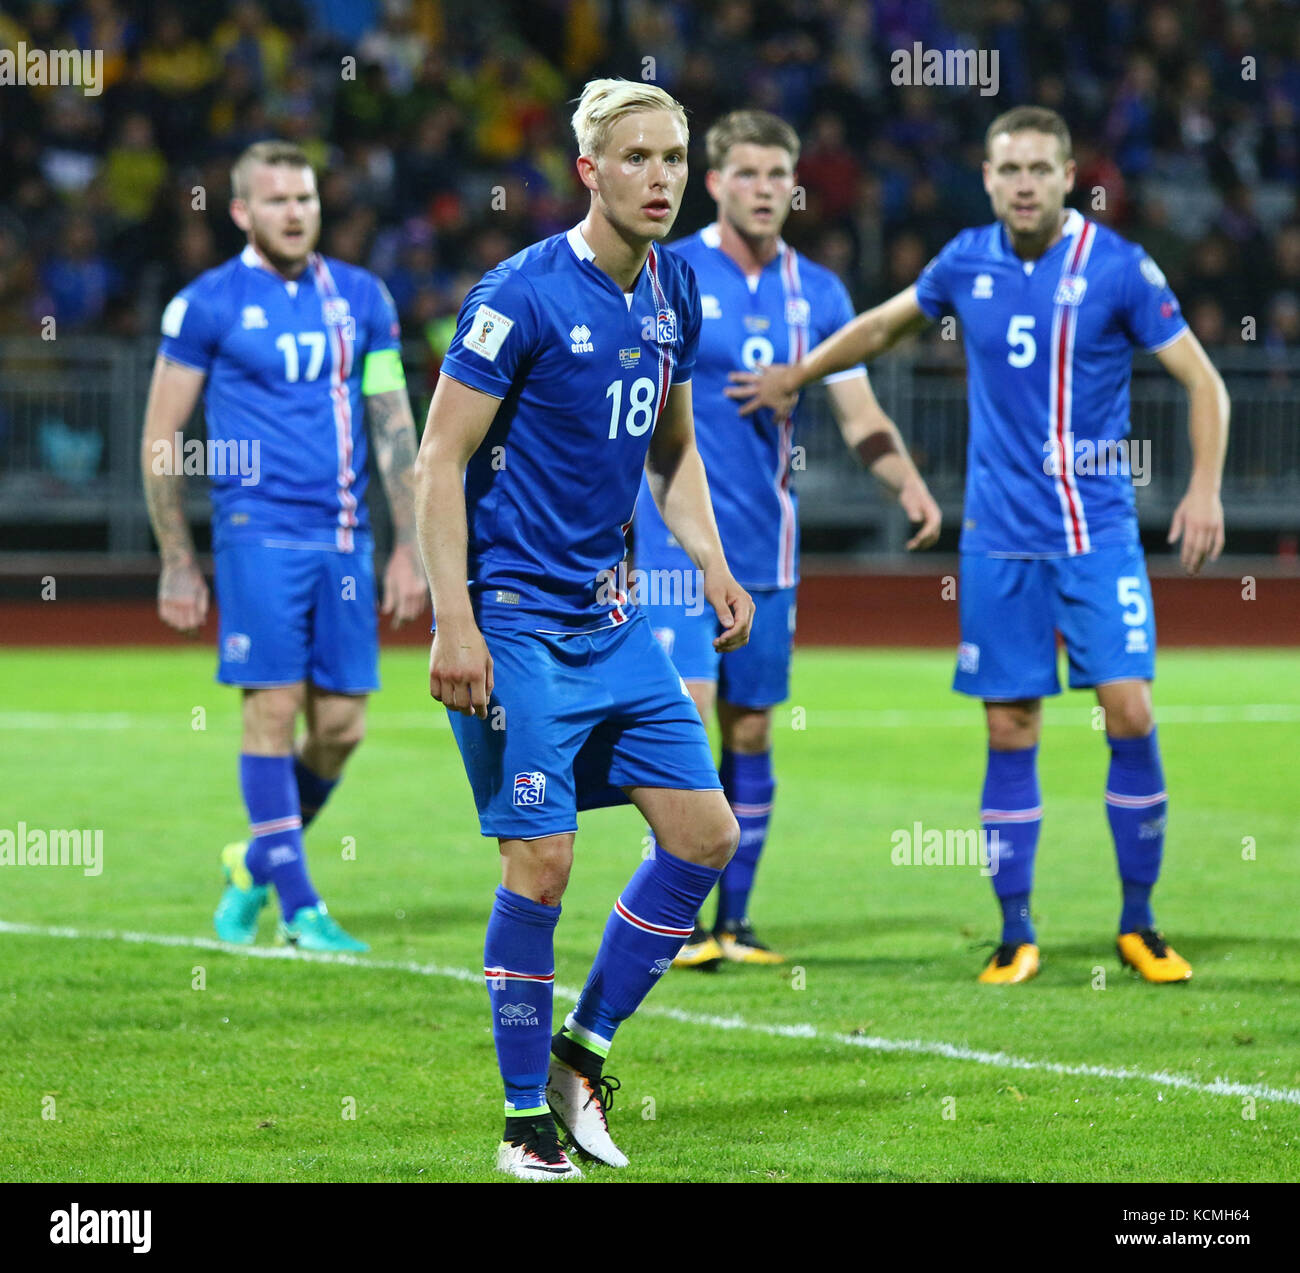 REYKJAVIK, ICELAND - SEPTEMBER 5, 2017: Icelandic players in action during FIFA World Cup 2018 qualifying game against Ukraine at Laugardalsvollur sta Stock Photo